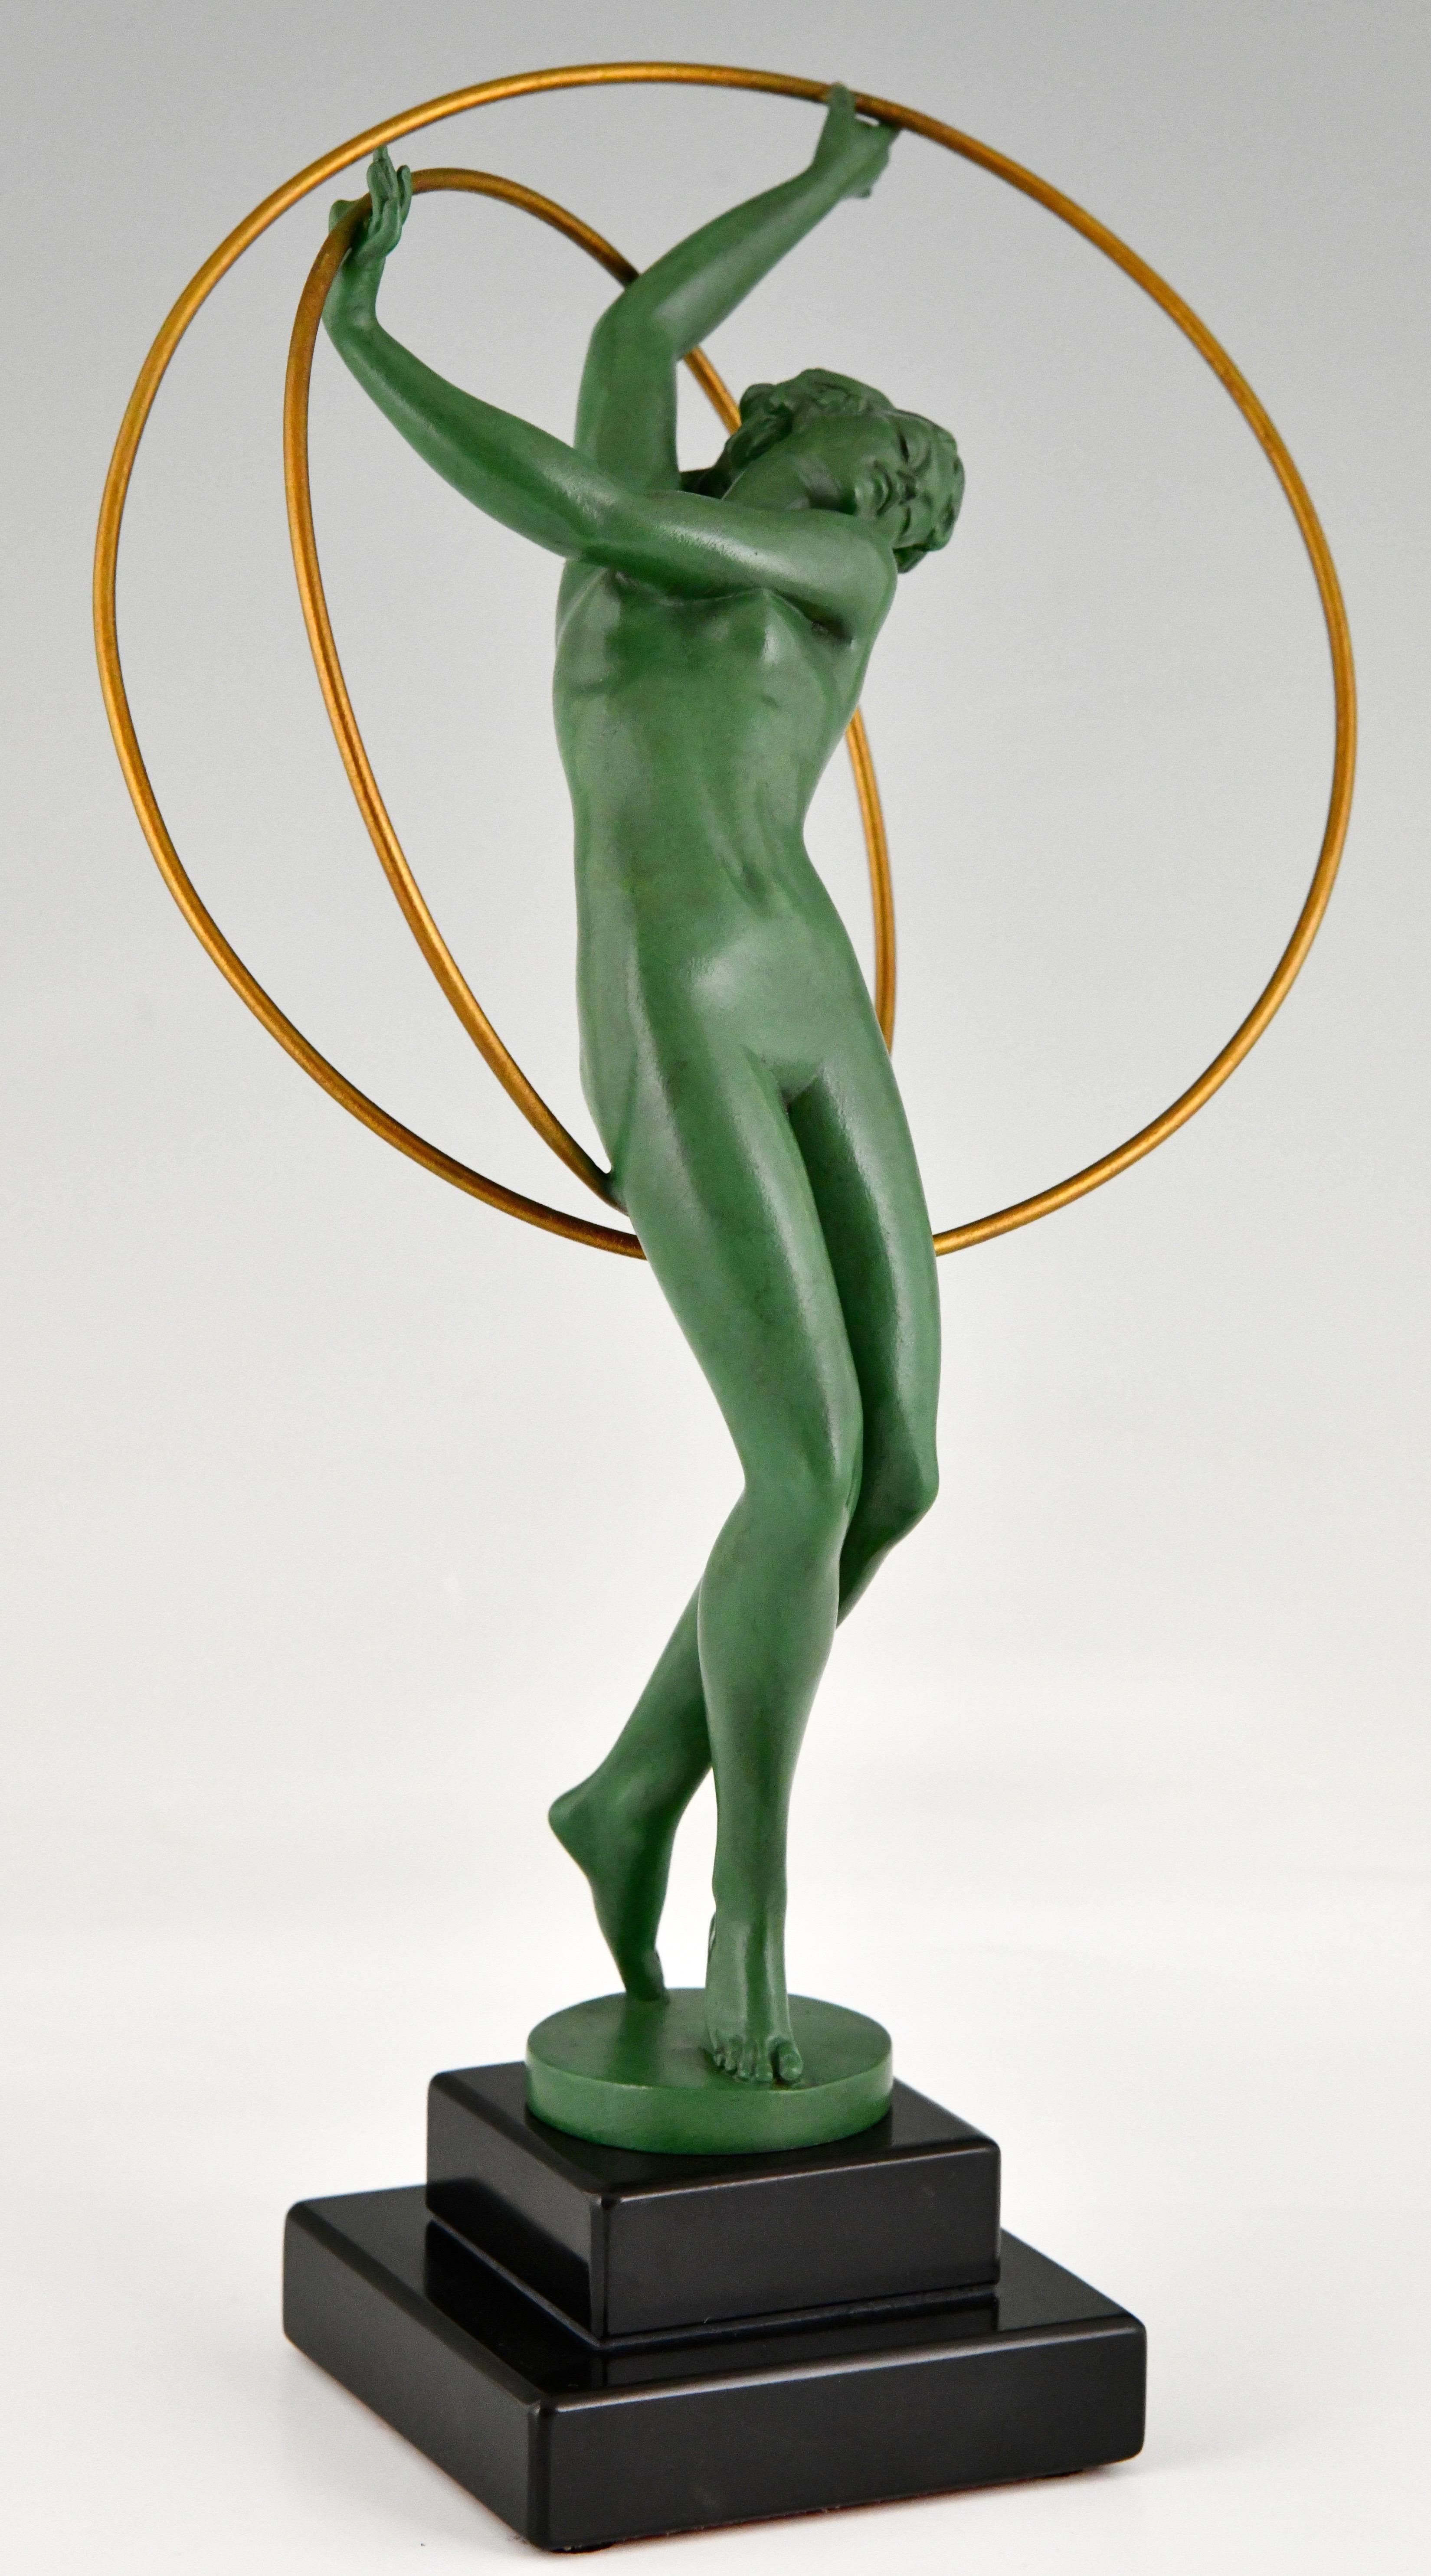 Art Deco sculpture nude hoop dancer signed by Fayral, pseudonym of Pierre Le Faguays.
Patinated Art Metal on Belgian Black marble base. 
France 1930.